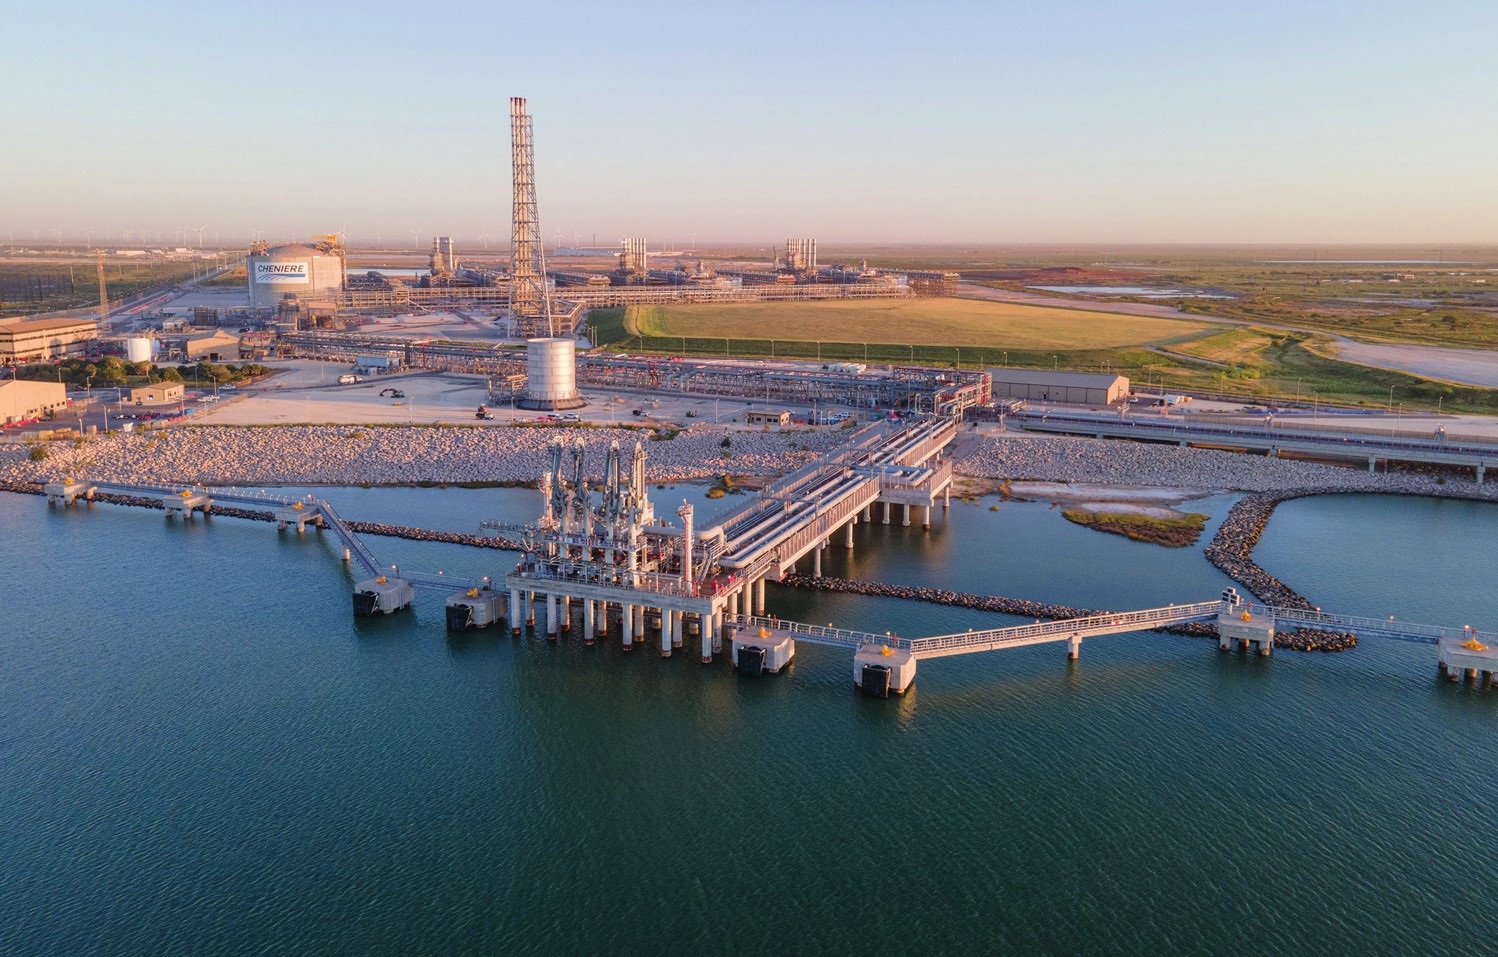 EIA US weekly LNG exports reach 18 cargoes